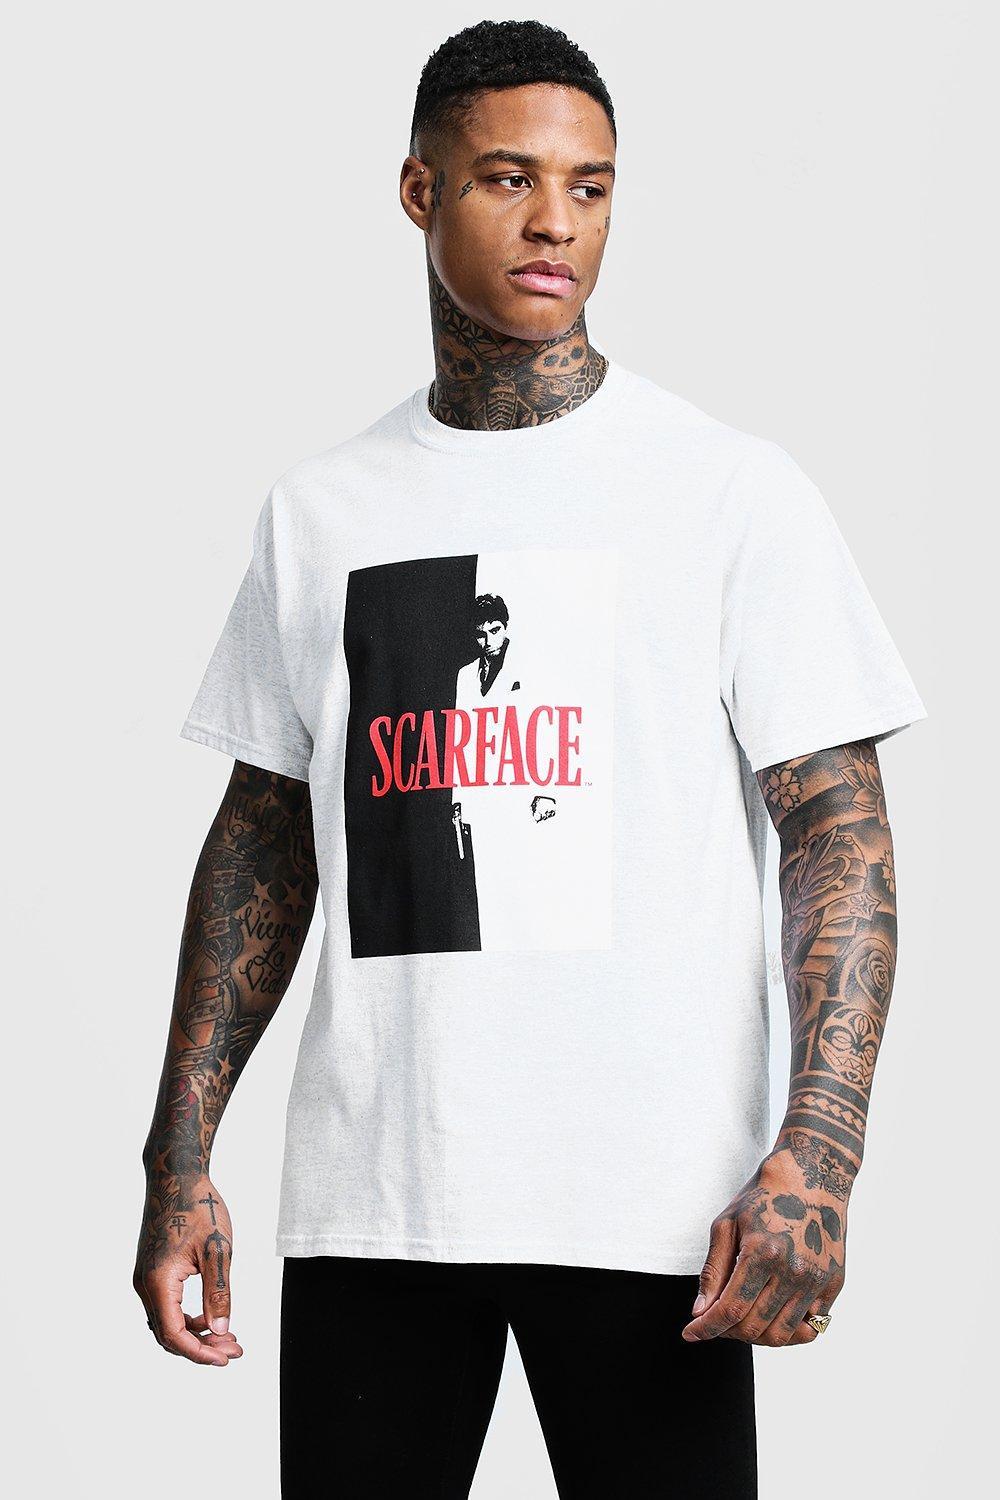 scarface shirt h&m > Up to 68% OFF > Free shipping